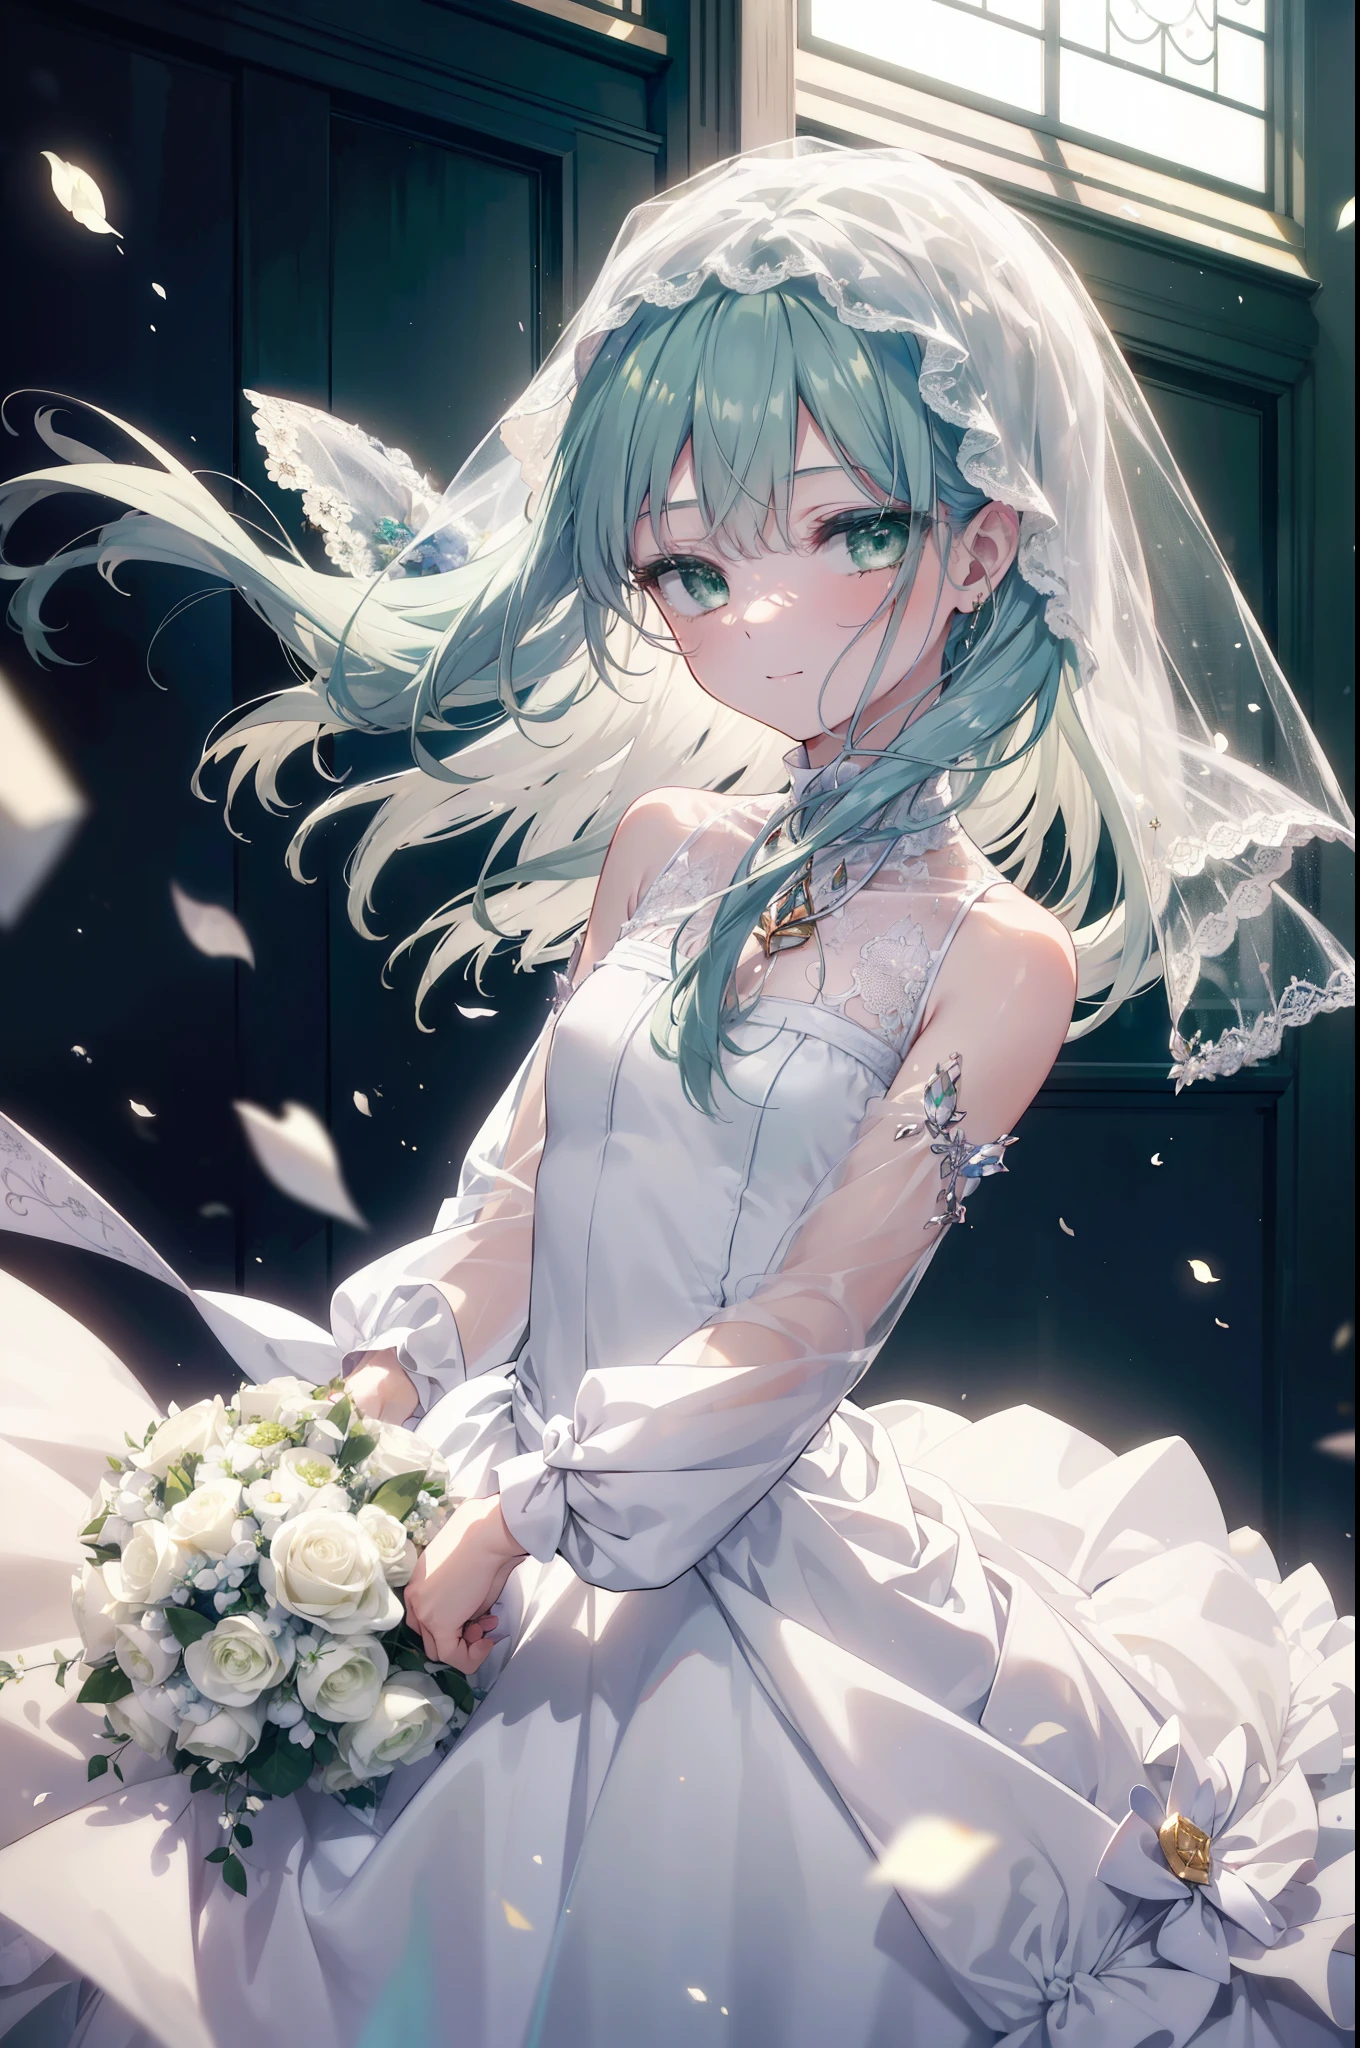 index, index, (green eyes:1.5), silver hair, long hair, (flat chest:1.2), Wedding dress,veil wedding skirt,bouquet,bouquetトス,holding a large bouquet of flowers in both hands,Stand Glass, happy smile, smile, 口を開ける
break looking at viewer, Upper body, whole body,
break indoors, church,chapel,
break (masterpiece:1.2), highest quality, High resolution, unity 8k wallpaper, (figure:0.8), (detailed and beautiful eyes:1.6), highly detailed face, perfect lighting, Very detailed CG, (perfect hands, perfect anatomy),